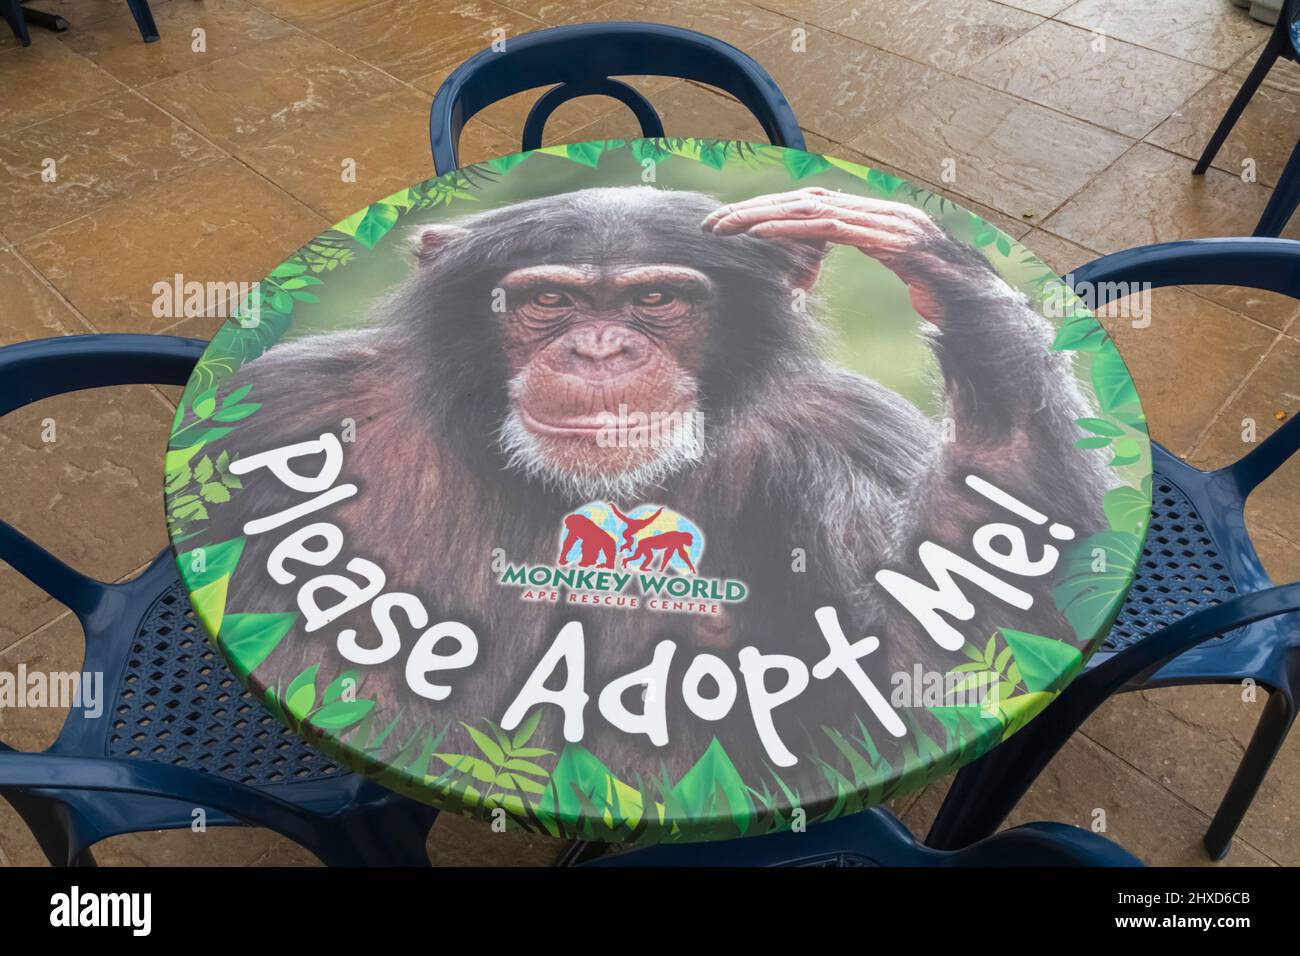 England, Dorset, Monkey World Attraction, Cafe Table Top Showing Monkey Waiting for Adoption Stock Photo